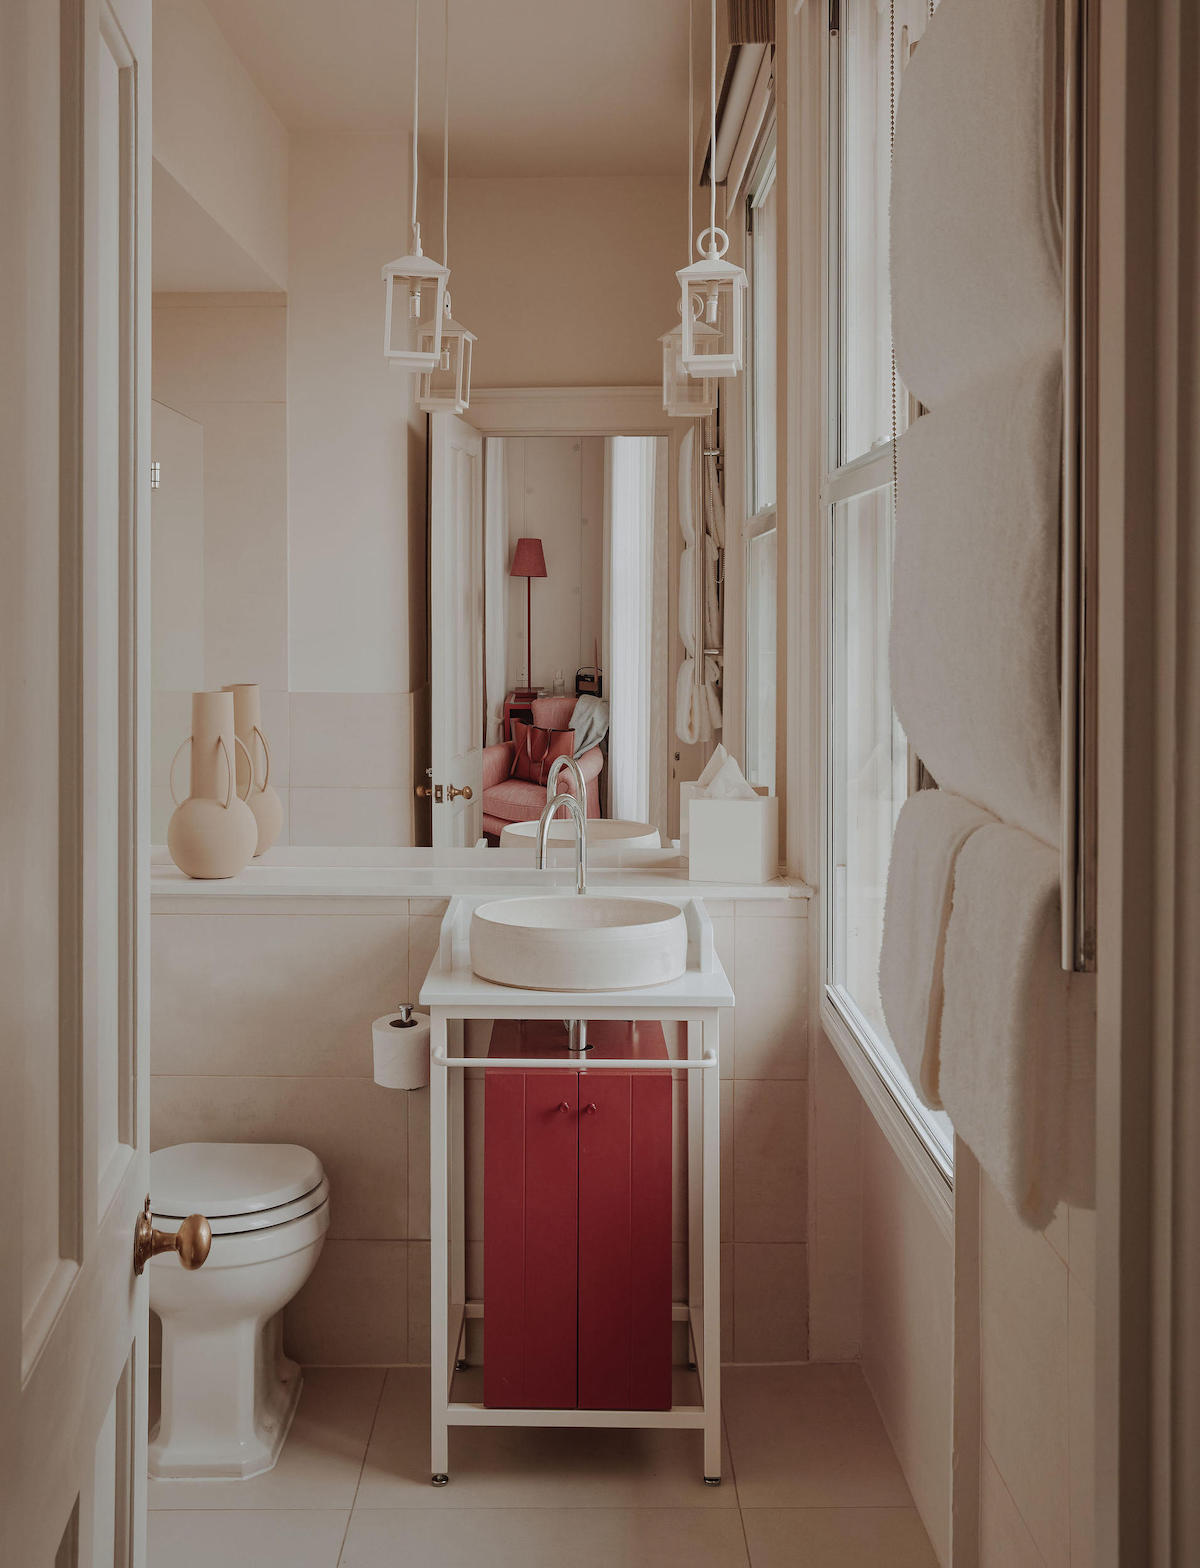 A boutique bathroom, with matte red furniture and hanging pendants